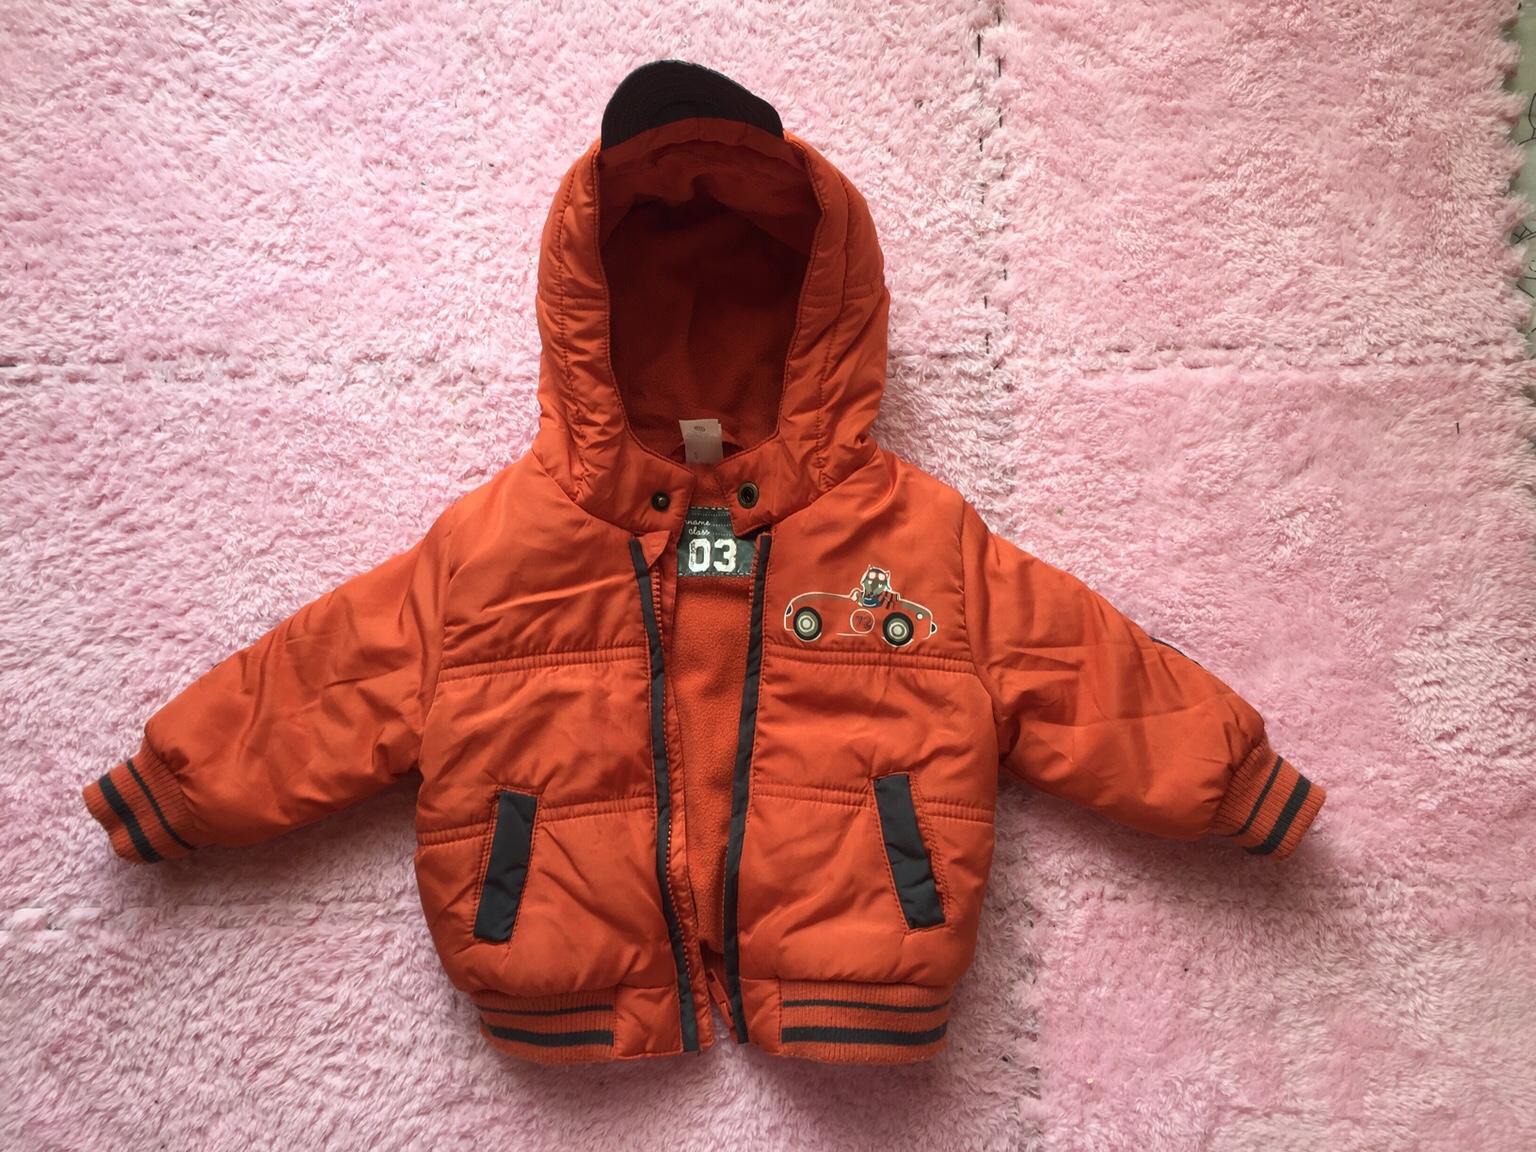 Baby Jacke Von Baby Club C A In Goppingen For 5 00 For Sale Shpock